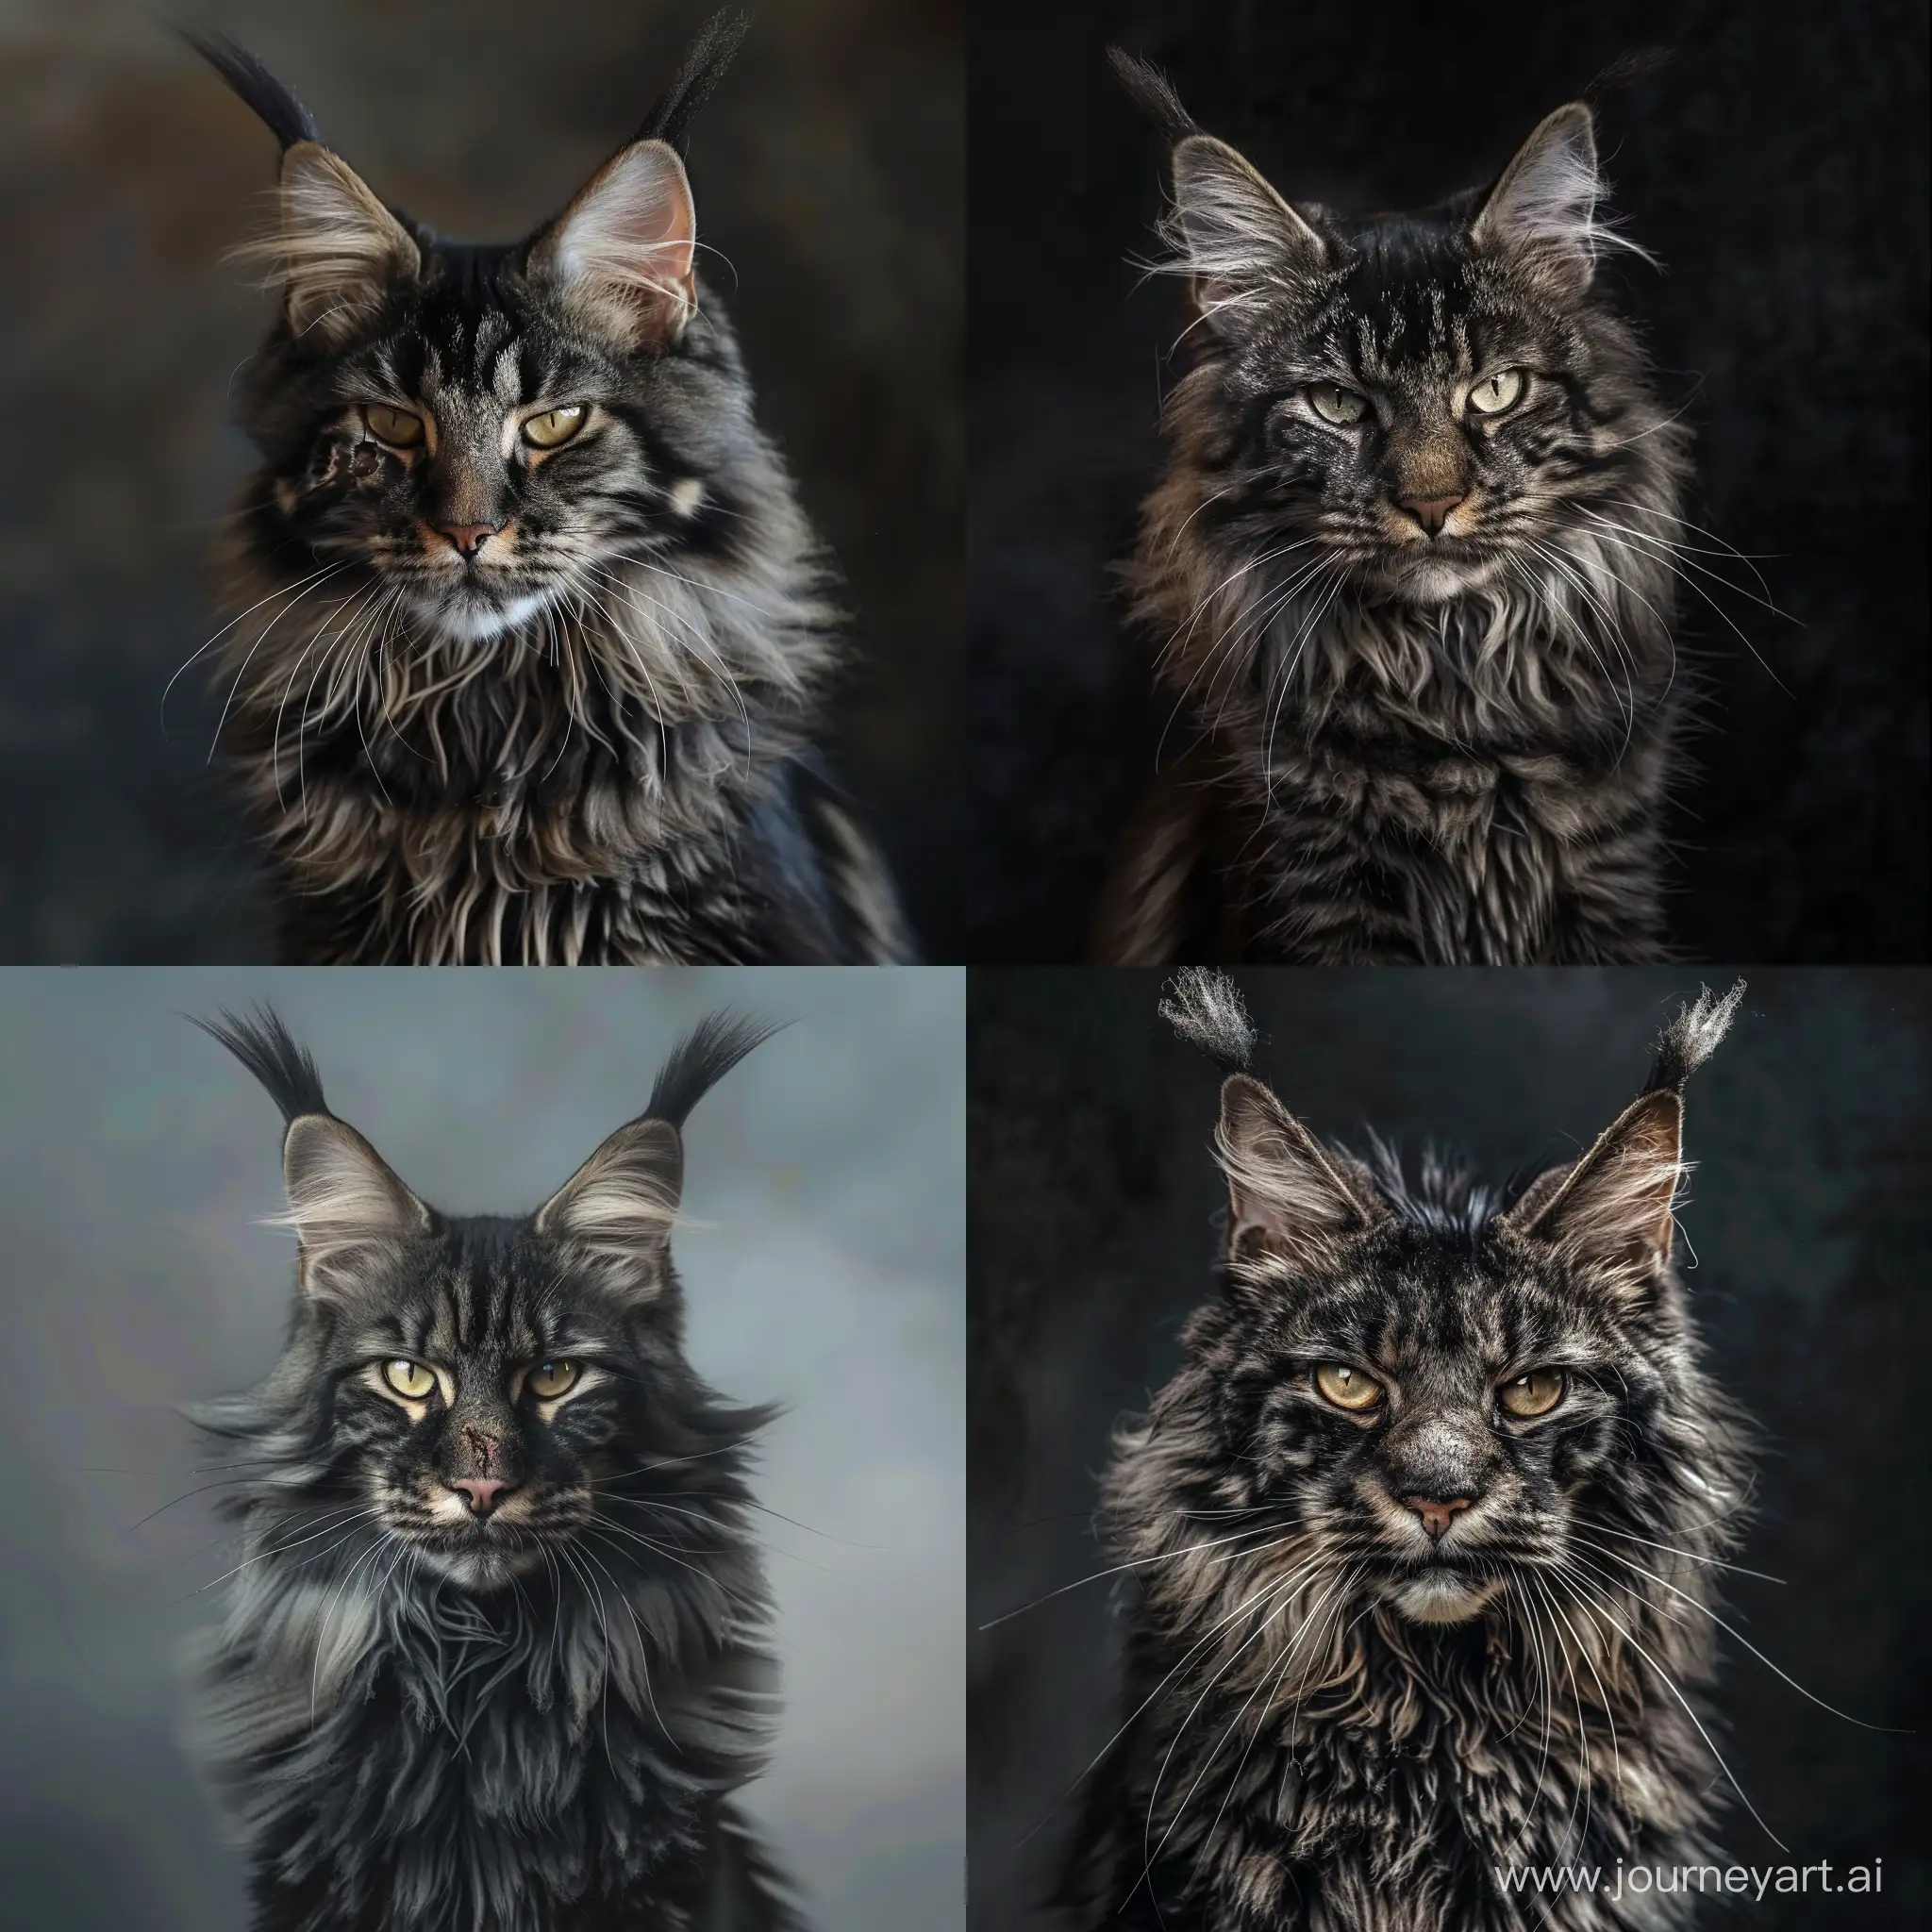 a strict tall cat with long ears and different eyes. black fluffy fur. grey stripes all over the body. There is a scar under his eyes from the battle for the tribe.